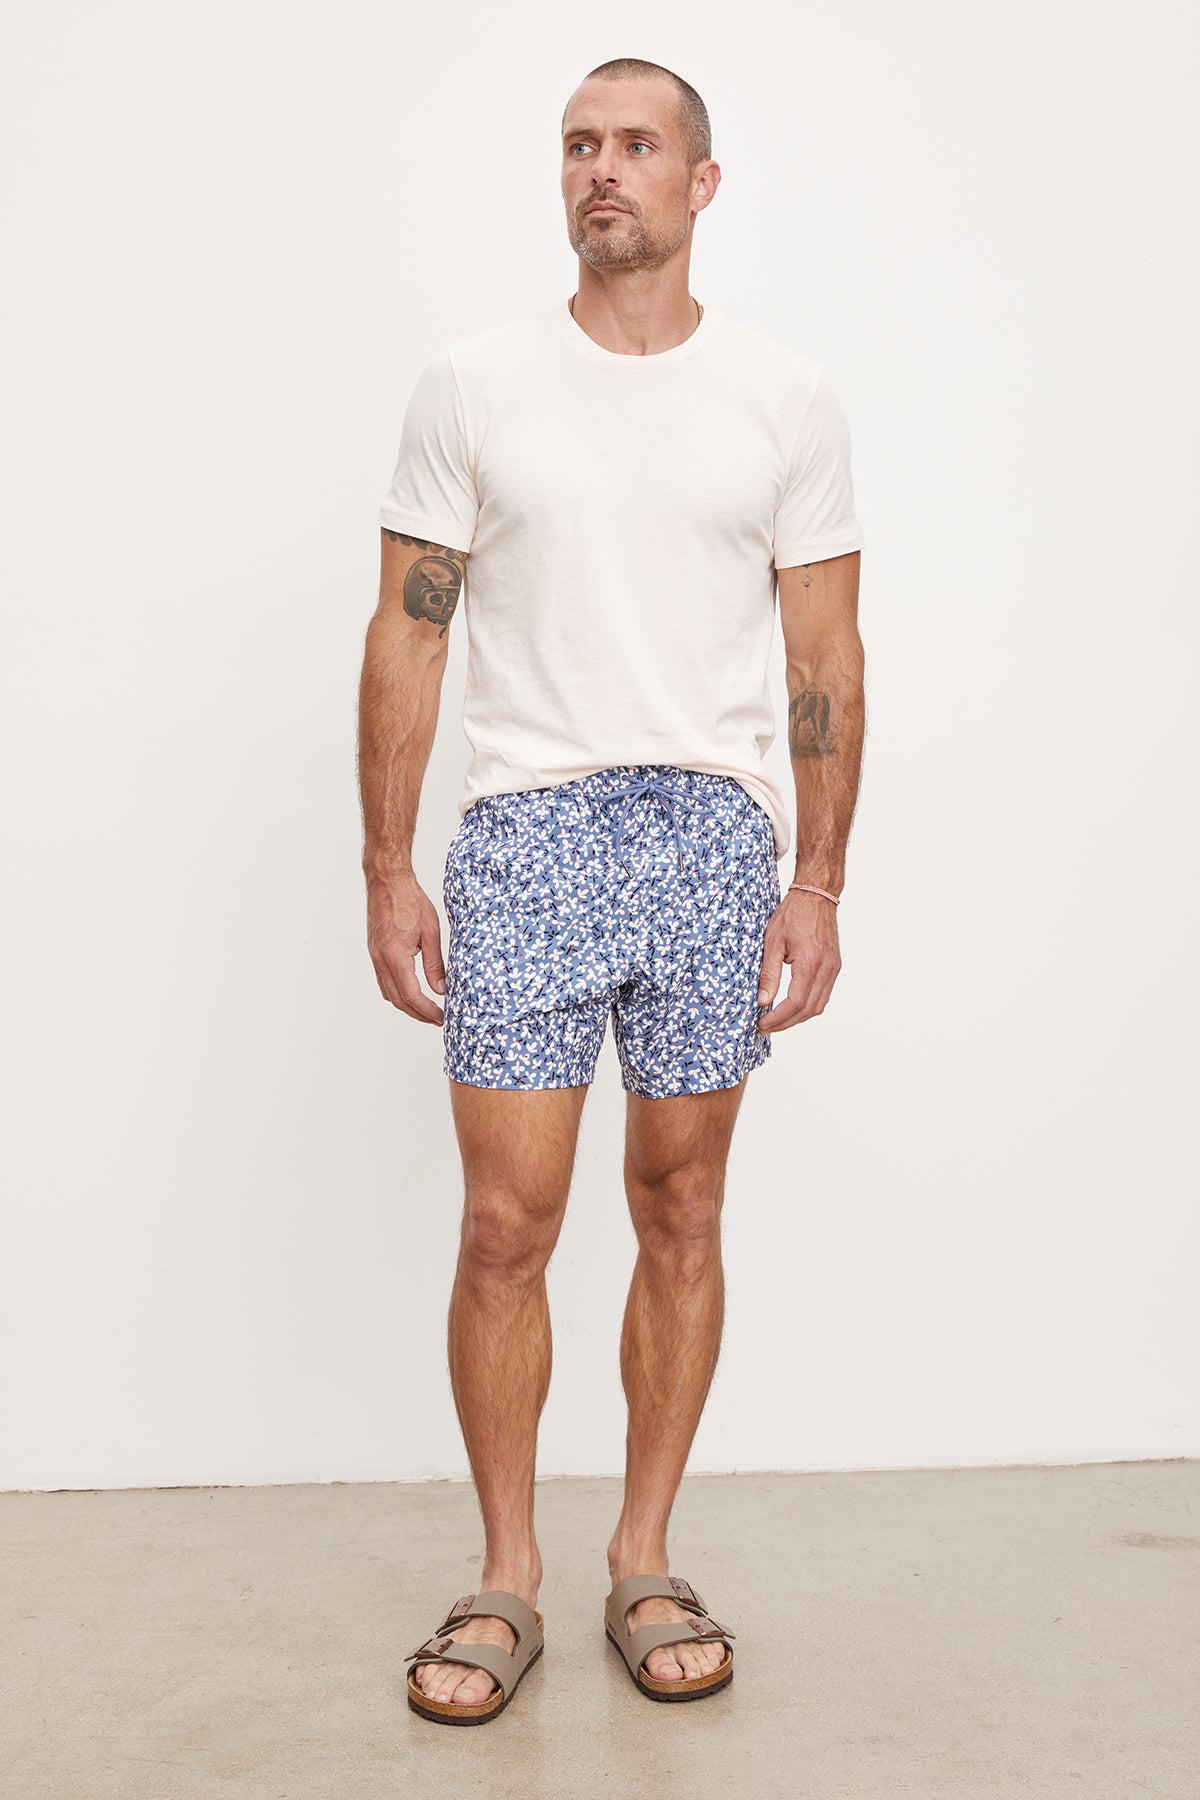   A man standing against a white background wearing a white t-shirt, Velvet by Graham & Spencer RICARDO SWIM SHORTS, and brown sandals. He has tattoos on his arms and is looking to the side. 